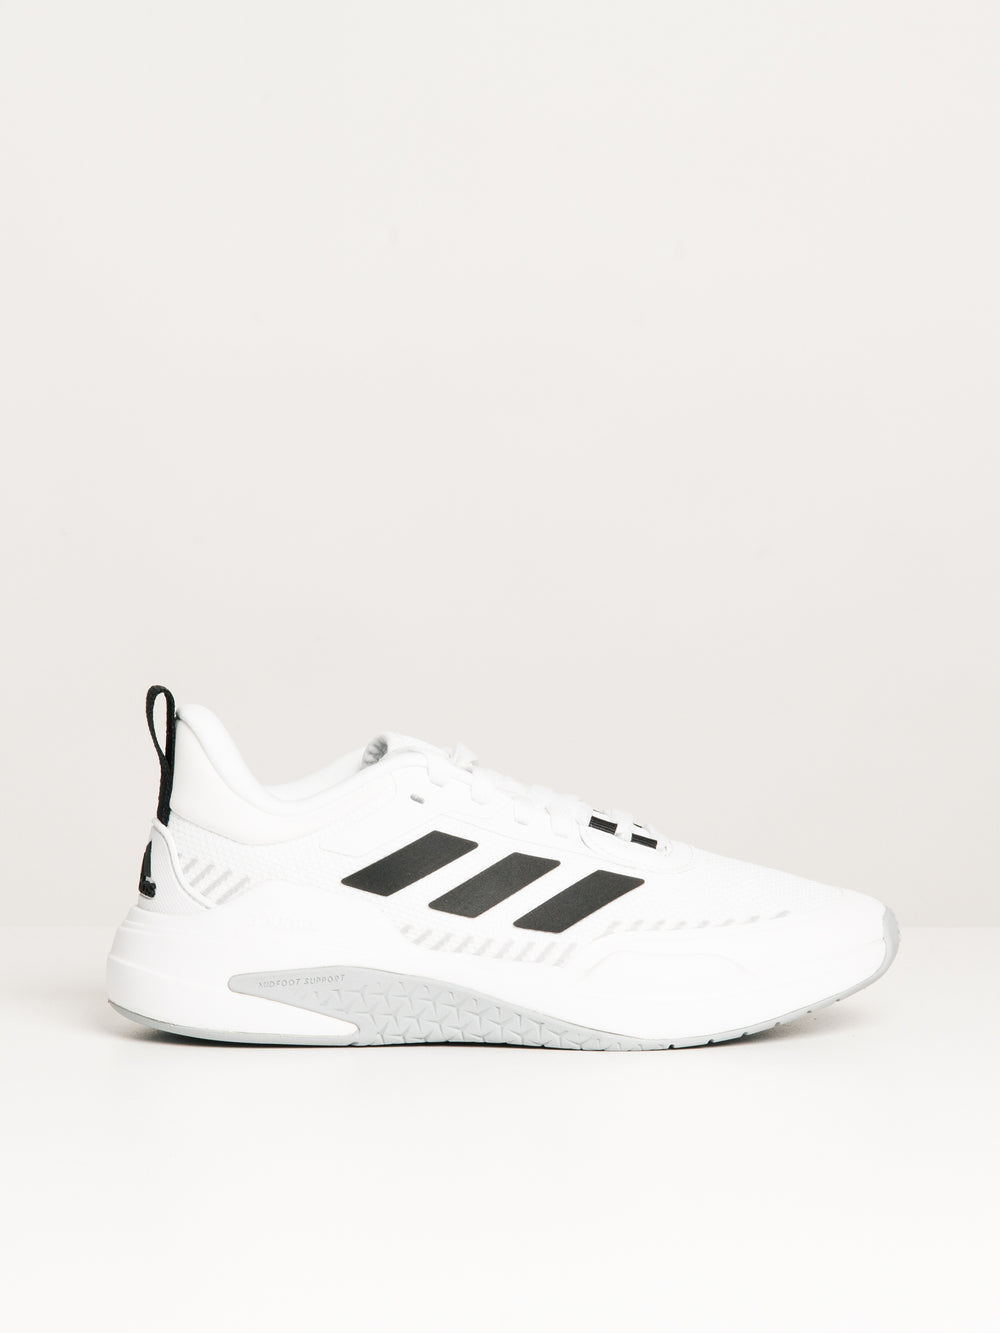 MENS ADIDAS LUX SNEAKERS - CLEARANCE